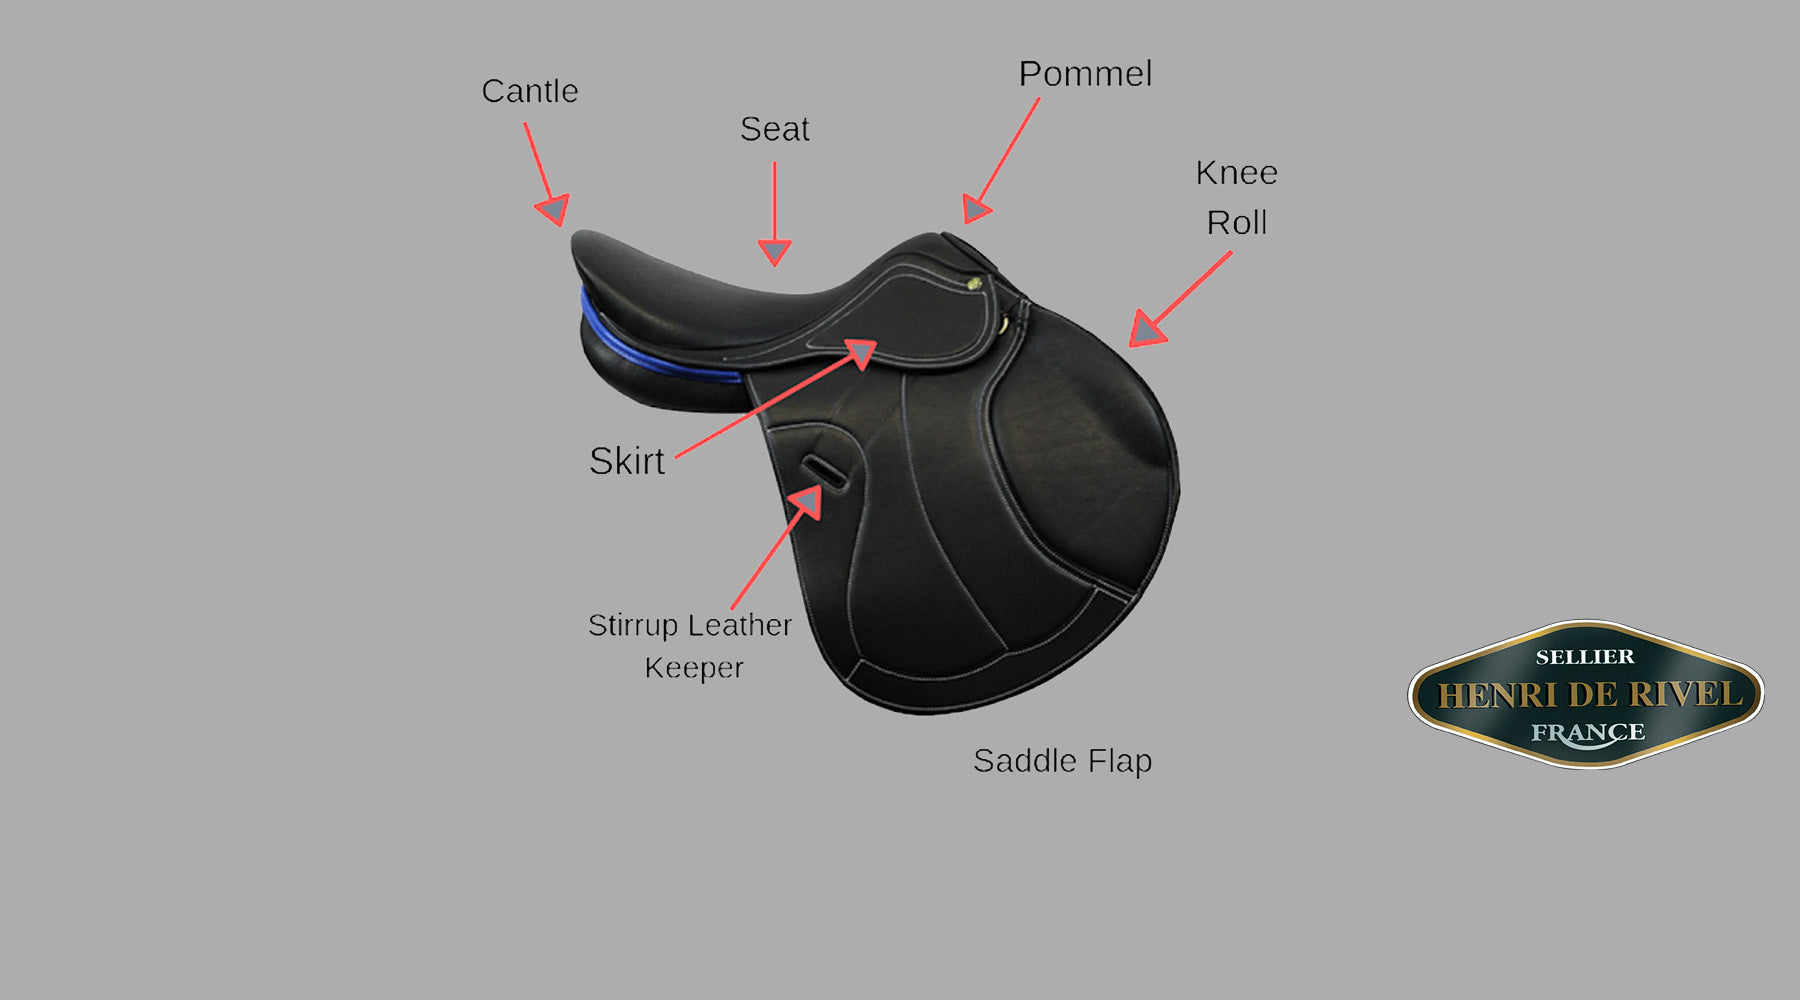 s Guide to the Parts and Functions of the English Saddles